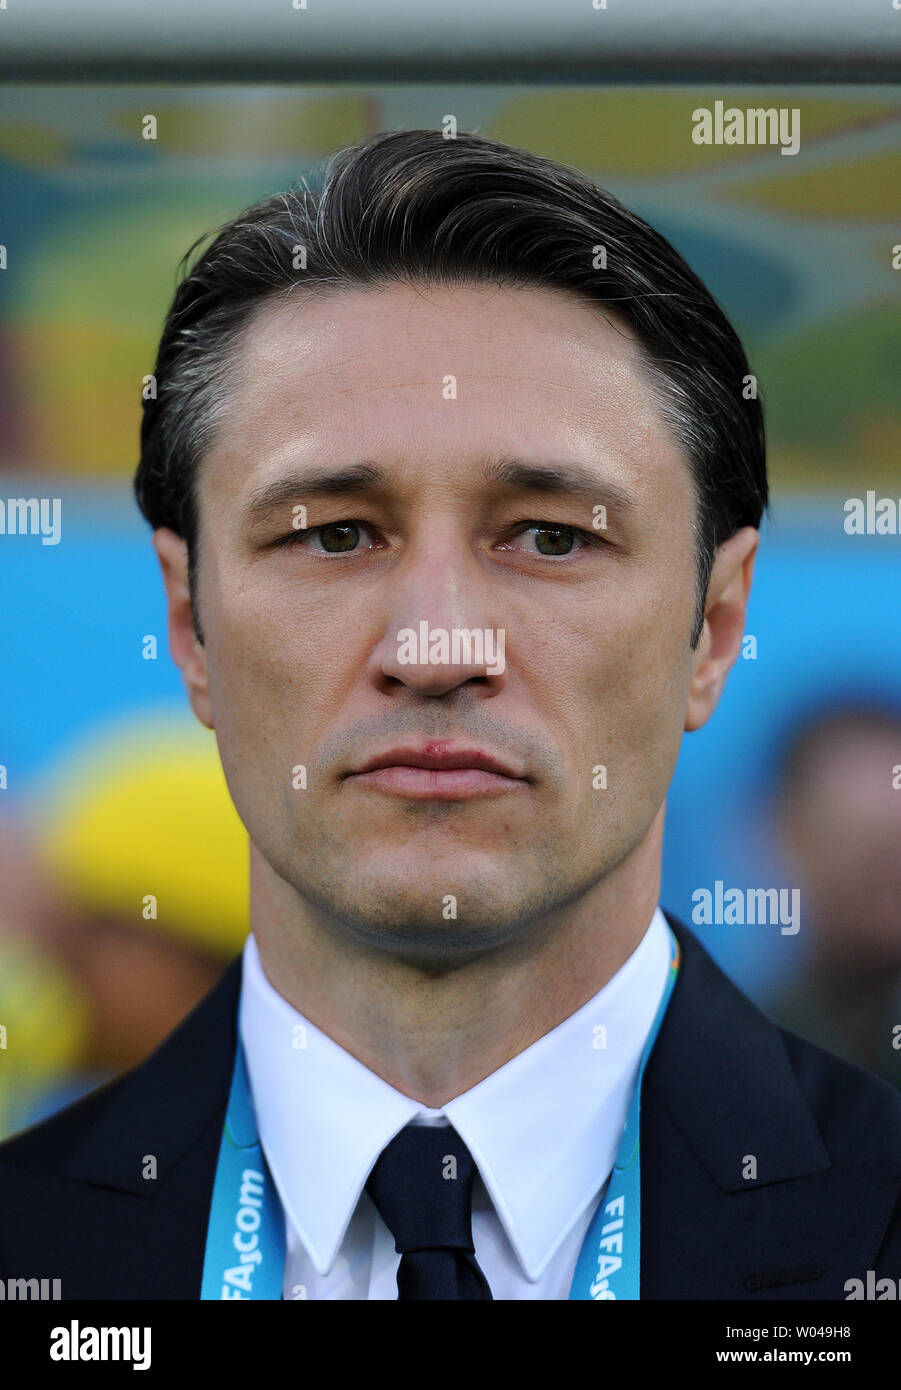 Croatia coach Niko Kovac looks on during the 2014 FIFA World Cup Group A match at the Arena Corinthians in Sao Paulo, Brazil on June 12, 2014. UPI/Chris Brunskill Stock Photo